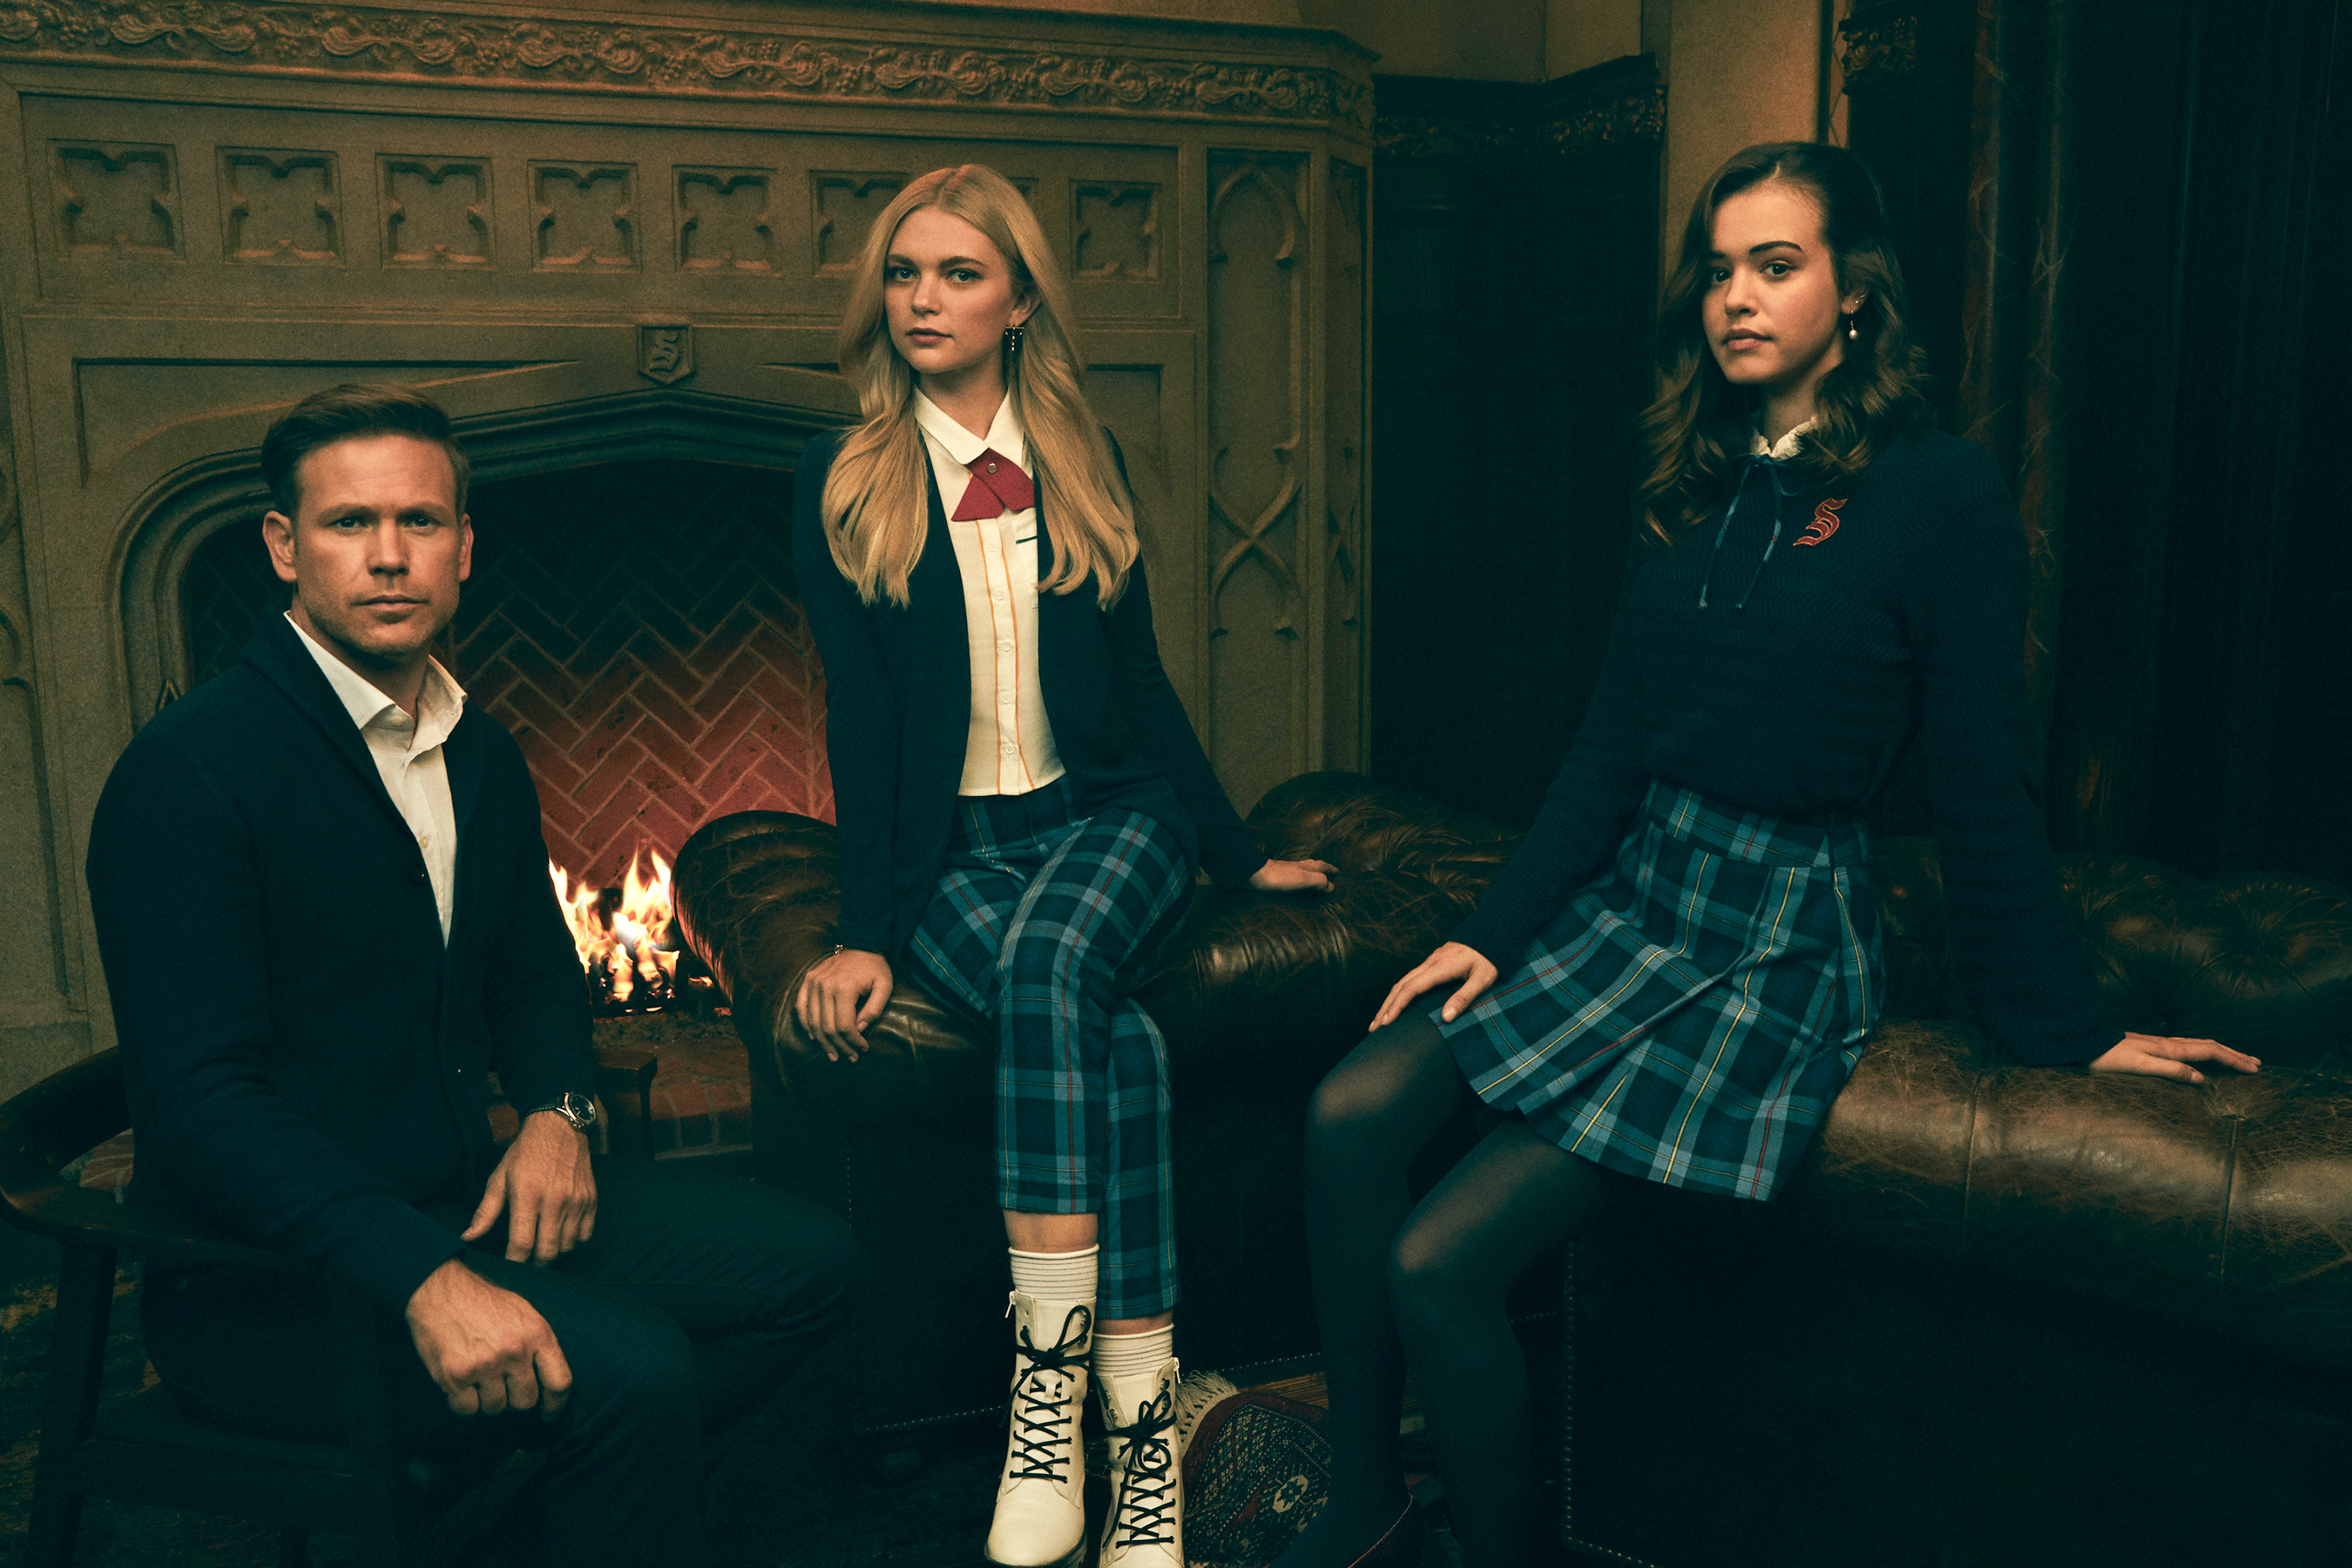 Legacies -- Image Number: LGC1_GROUP_1_0014r.jpg -- Pictured (L-R): Matthew Davis as Alaric, Jenny Boyd as Lizzie, and Kaylee Bryant as Josie -- Photo: Miller Mobley/The CW -- ÃÂ© 2018 The CW Network, LLC. All Rights Reserved.